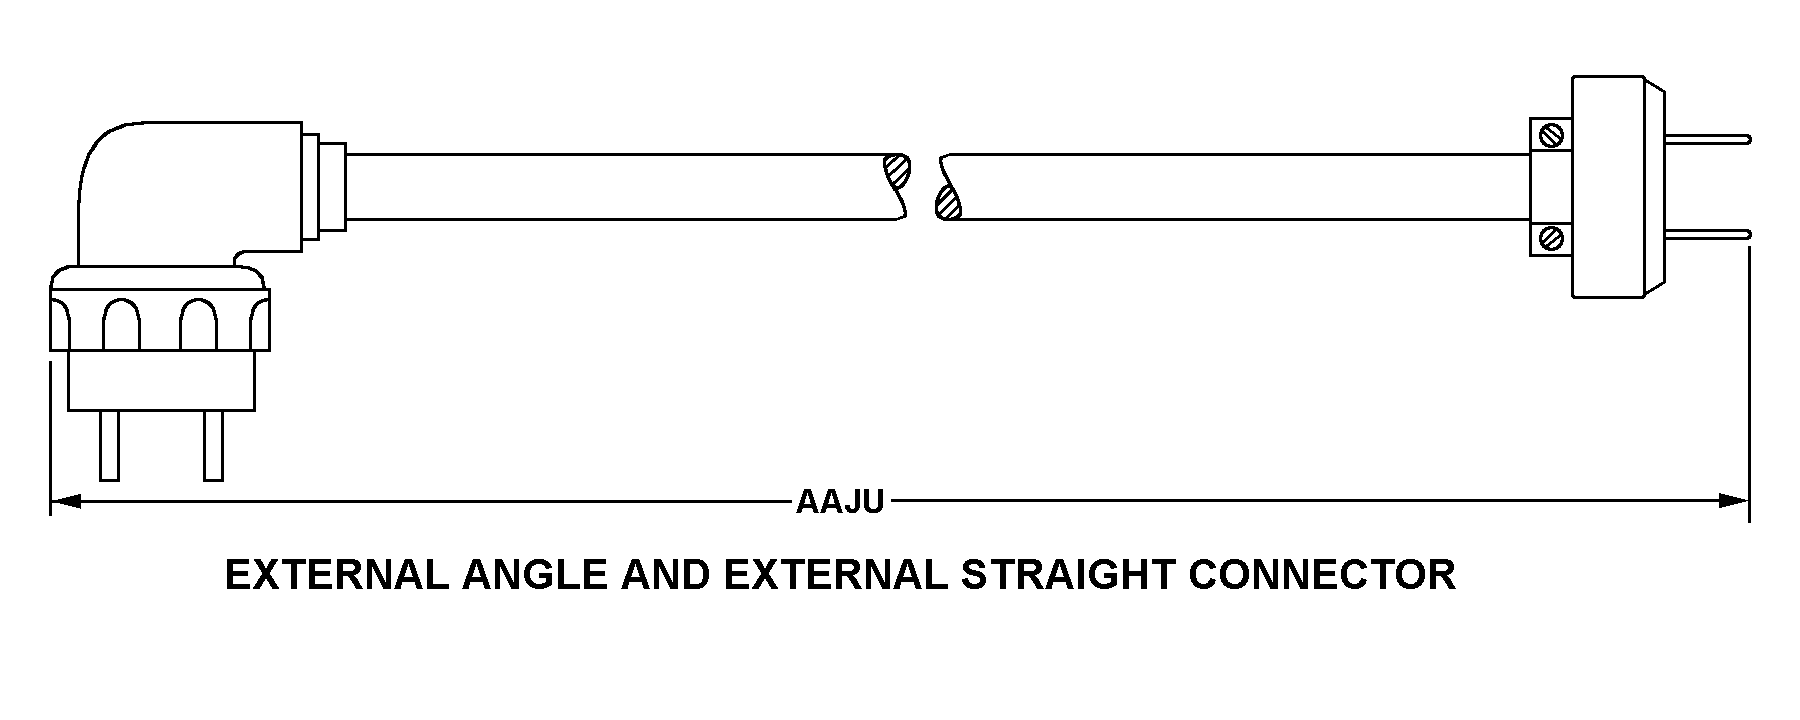 EXTERNAL ANGLE AND EXTERNAL STRAIGHT CONNECTOR style nsn 5995-01-375-7739